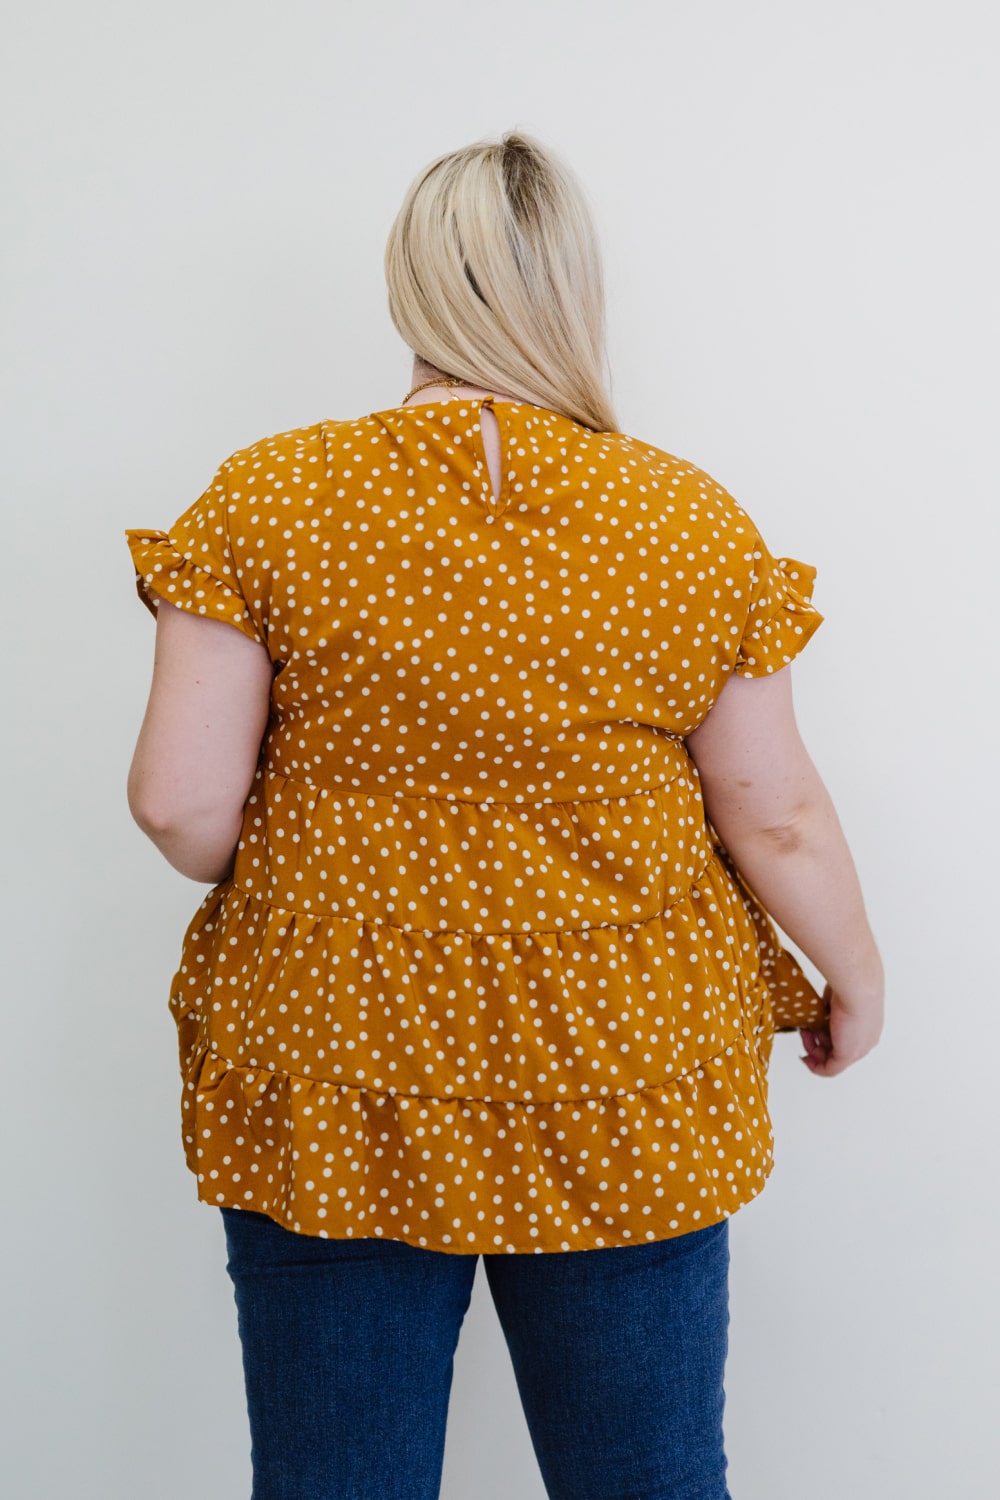 Andree by Unit You're My Honey Full Size Run Polka Dot Tiered Blouse